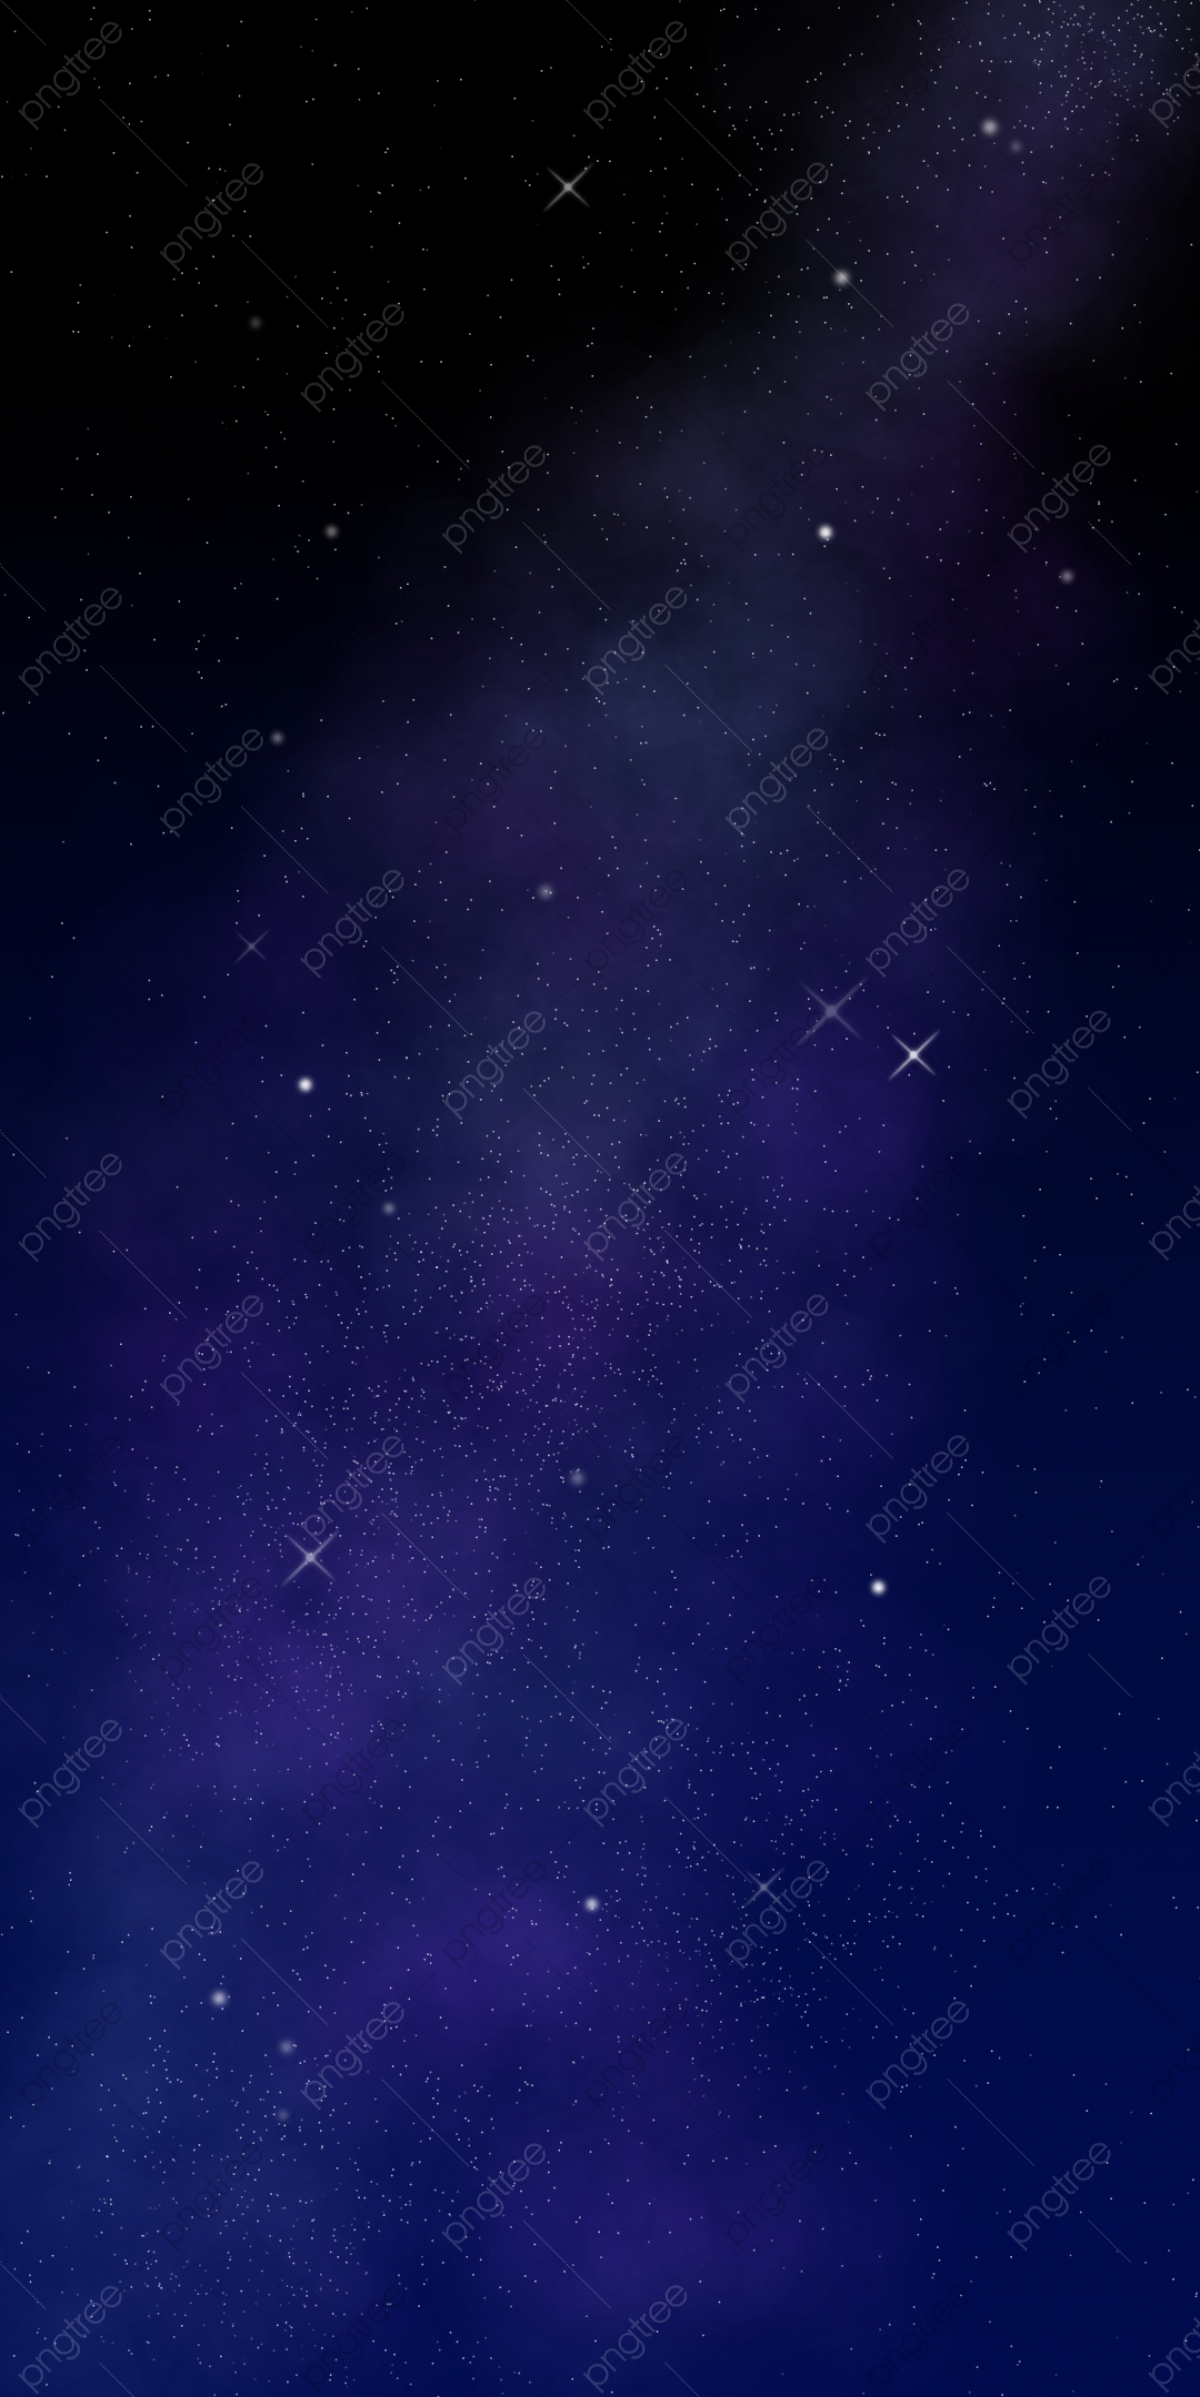 Dark Starry Night Phone Wallpaper Background, Phone Wallpaper, Dark Blue, Starry Night Background Image for Free Download